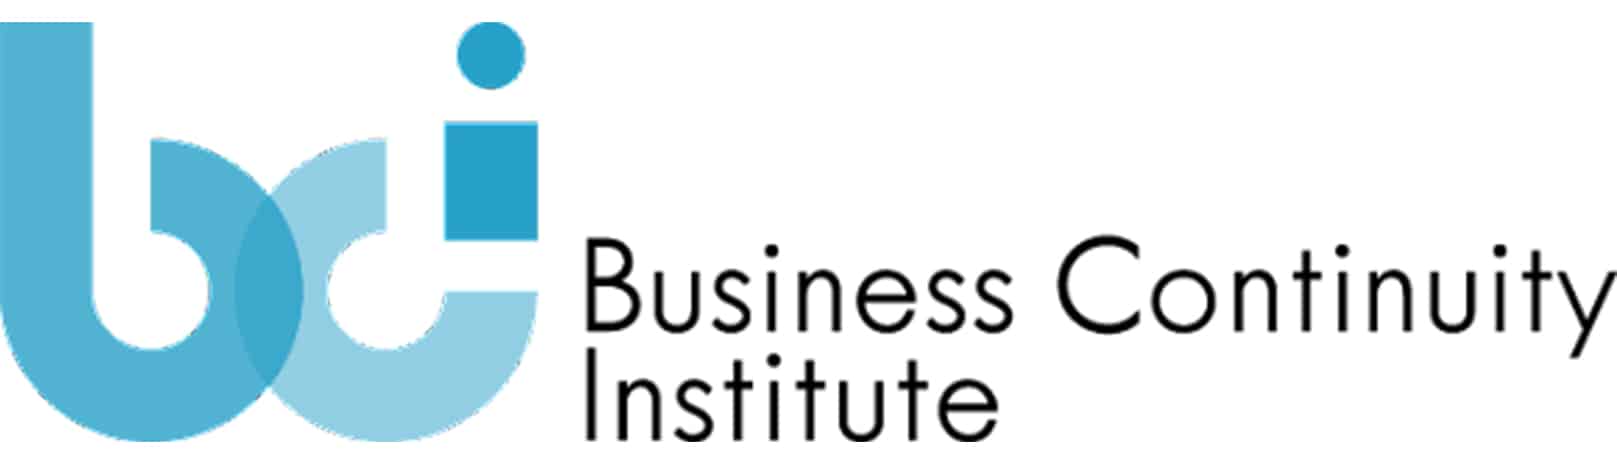 The-Business-Continuity-Institute-(BCI)